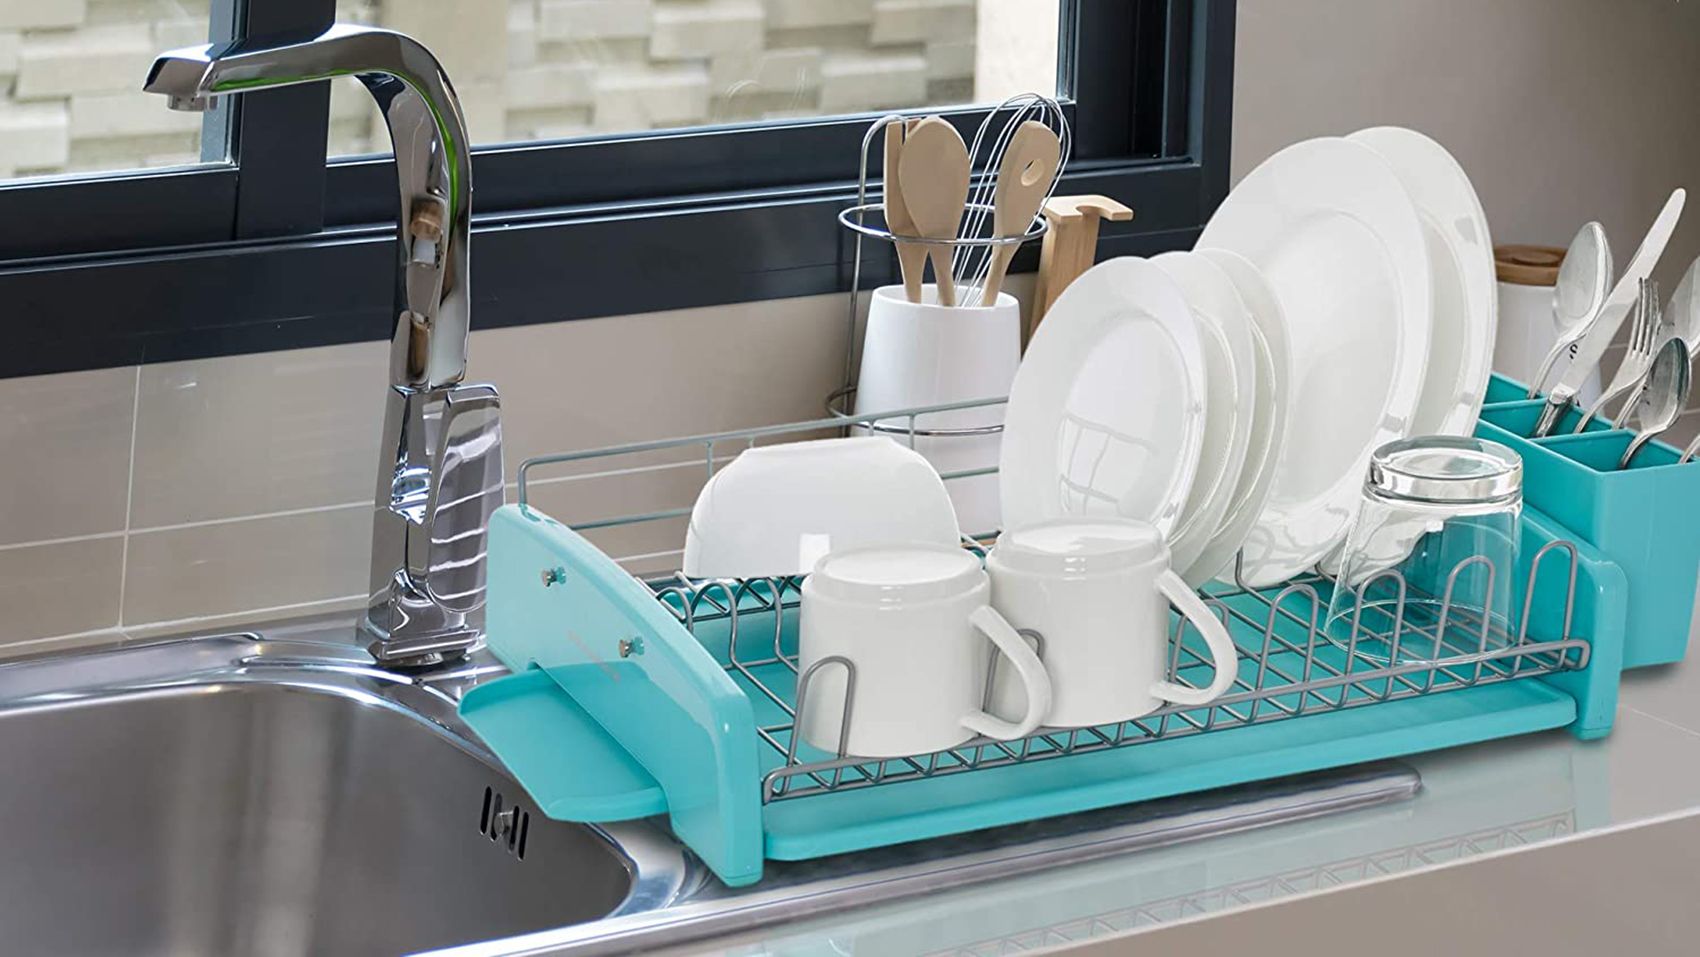 Dish washing products: 17 gadgets to improve your least favorite chore